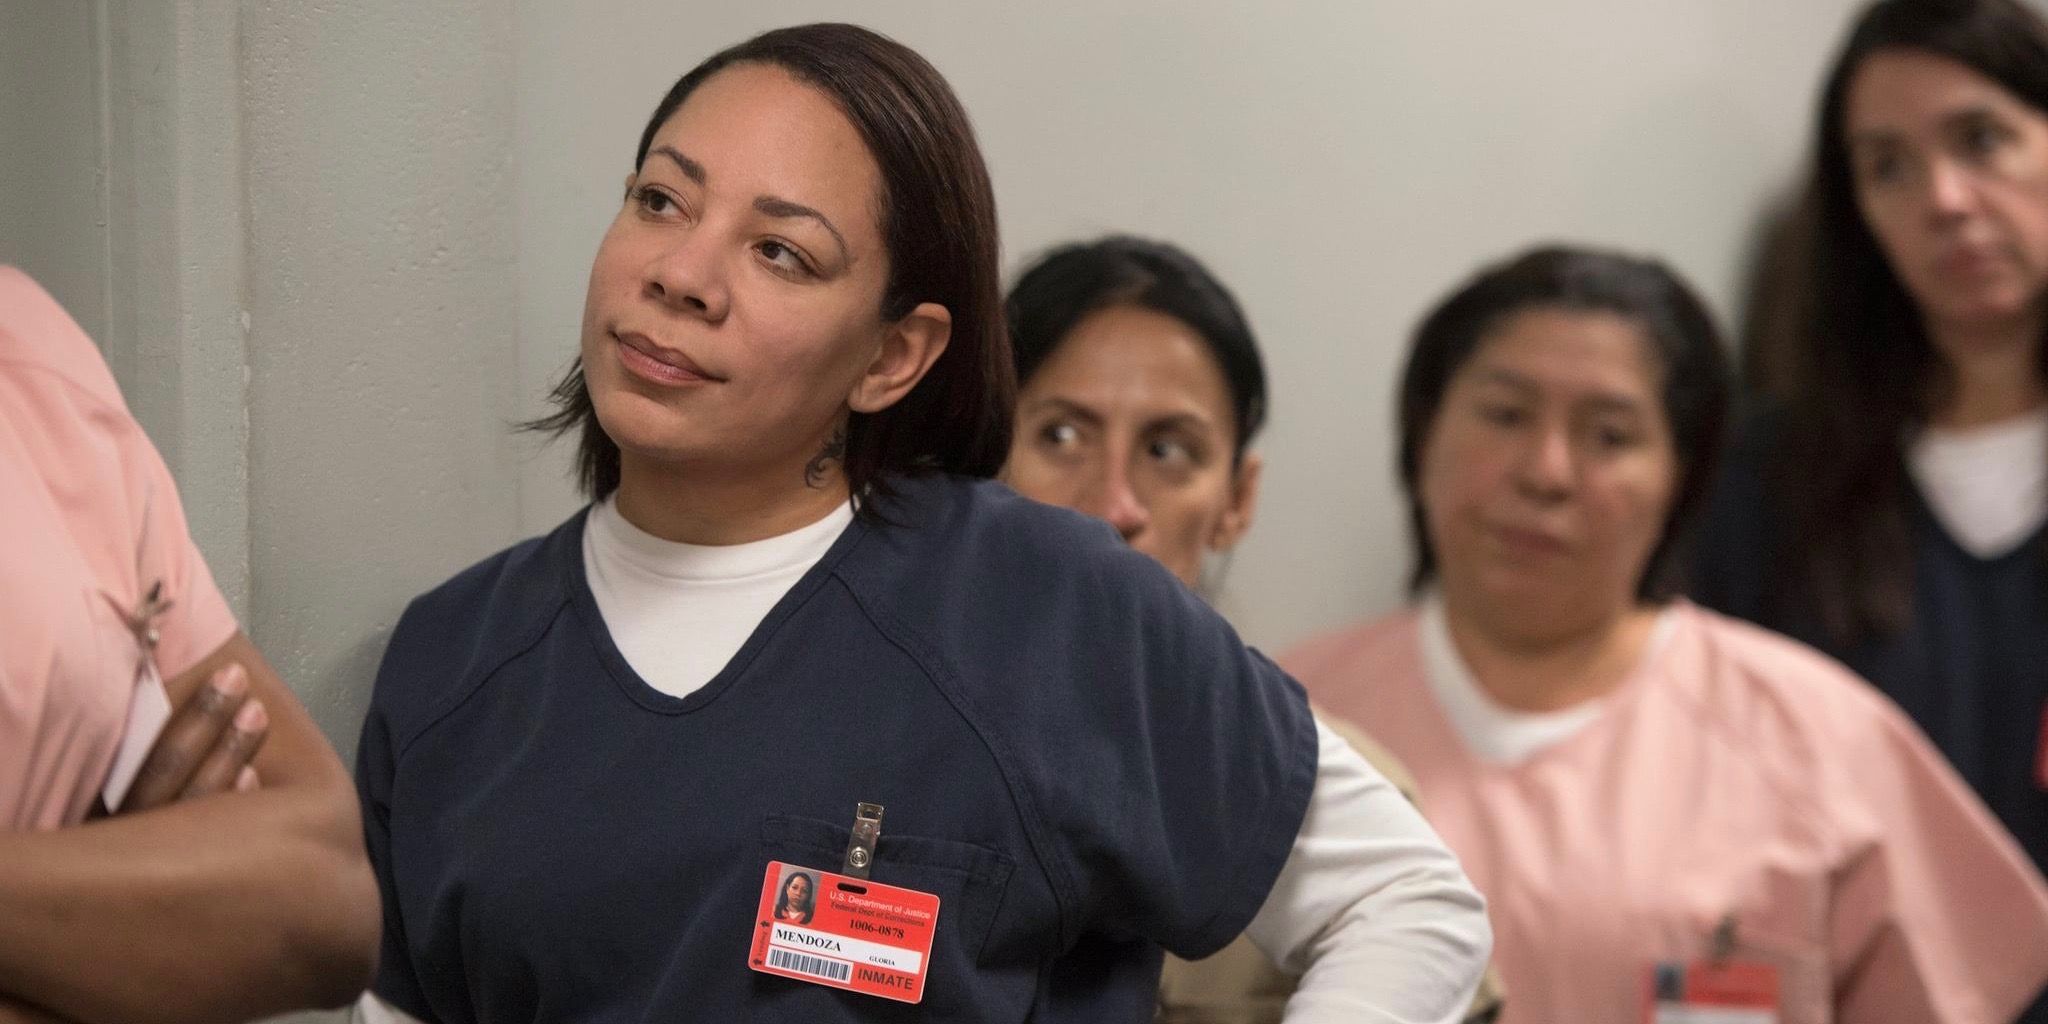 Orange Is The New Black 10 Unanswered Questions We Still Have About The Main Characters